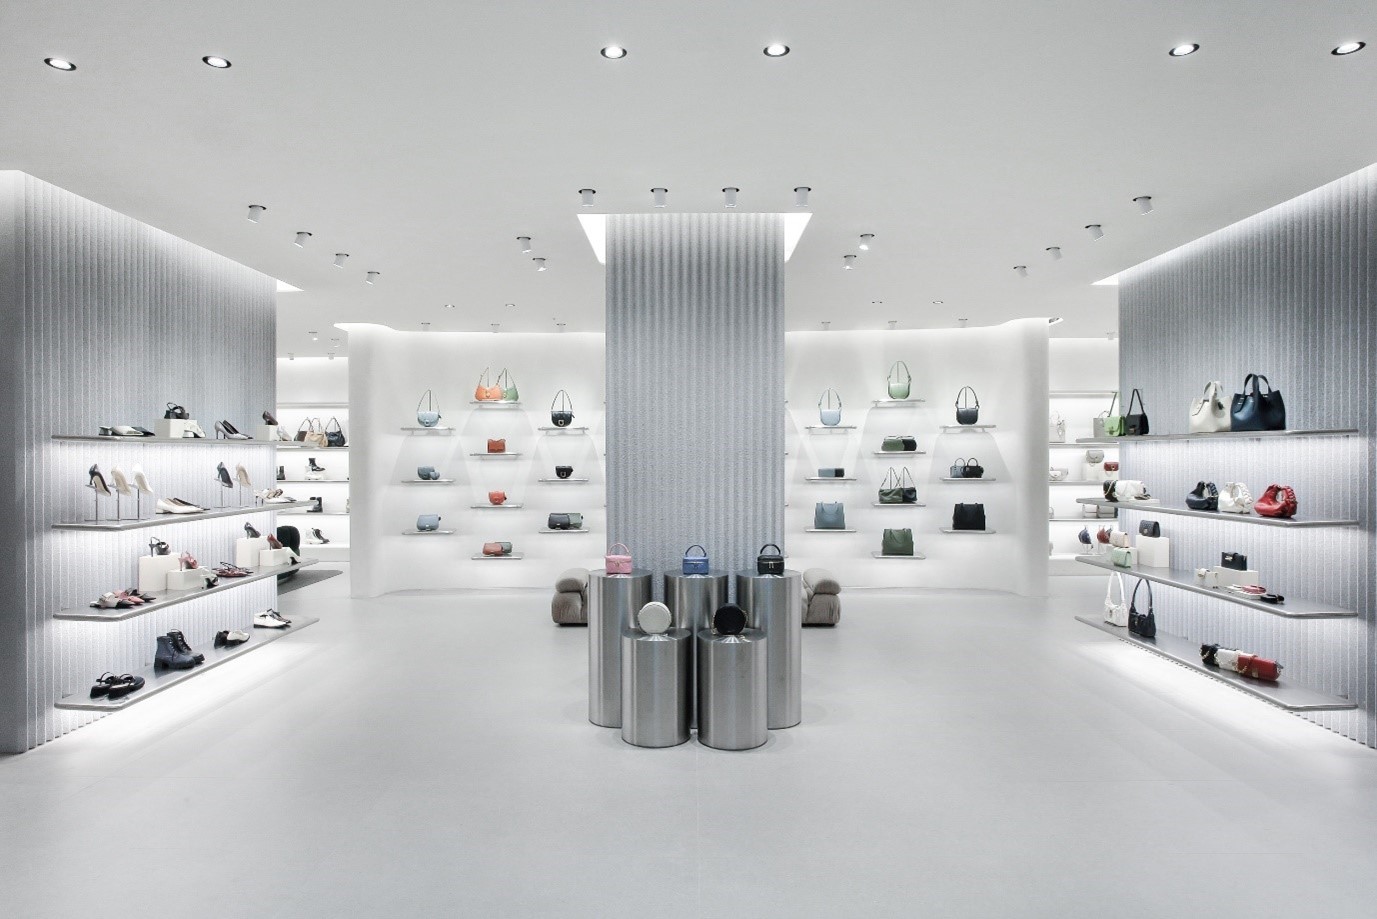 Spanning over 302 square metres, the Kaohsiung boutique is the largest out of the eight CHARLES & KEITH stores in Taiwan and encapsulates the brand's 6th generation store concept with the introduction of gradual curves and fluid lines while retaining a minimal colour scheme to achieve a clean, pared-back and modern aesthetic.